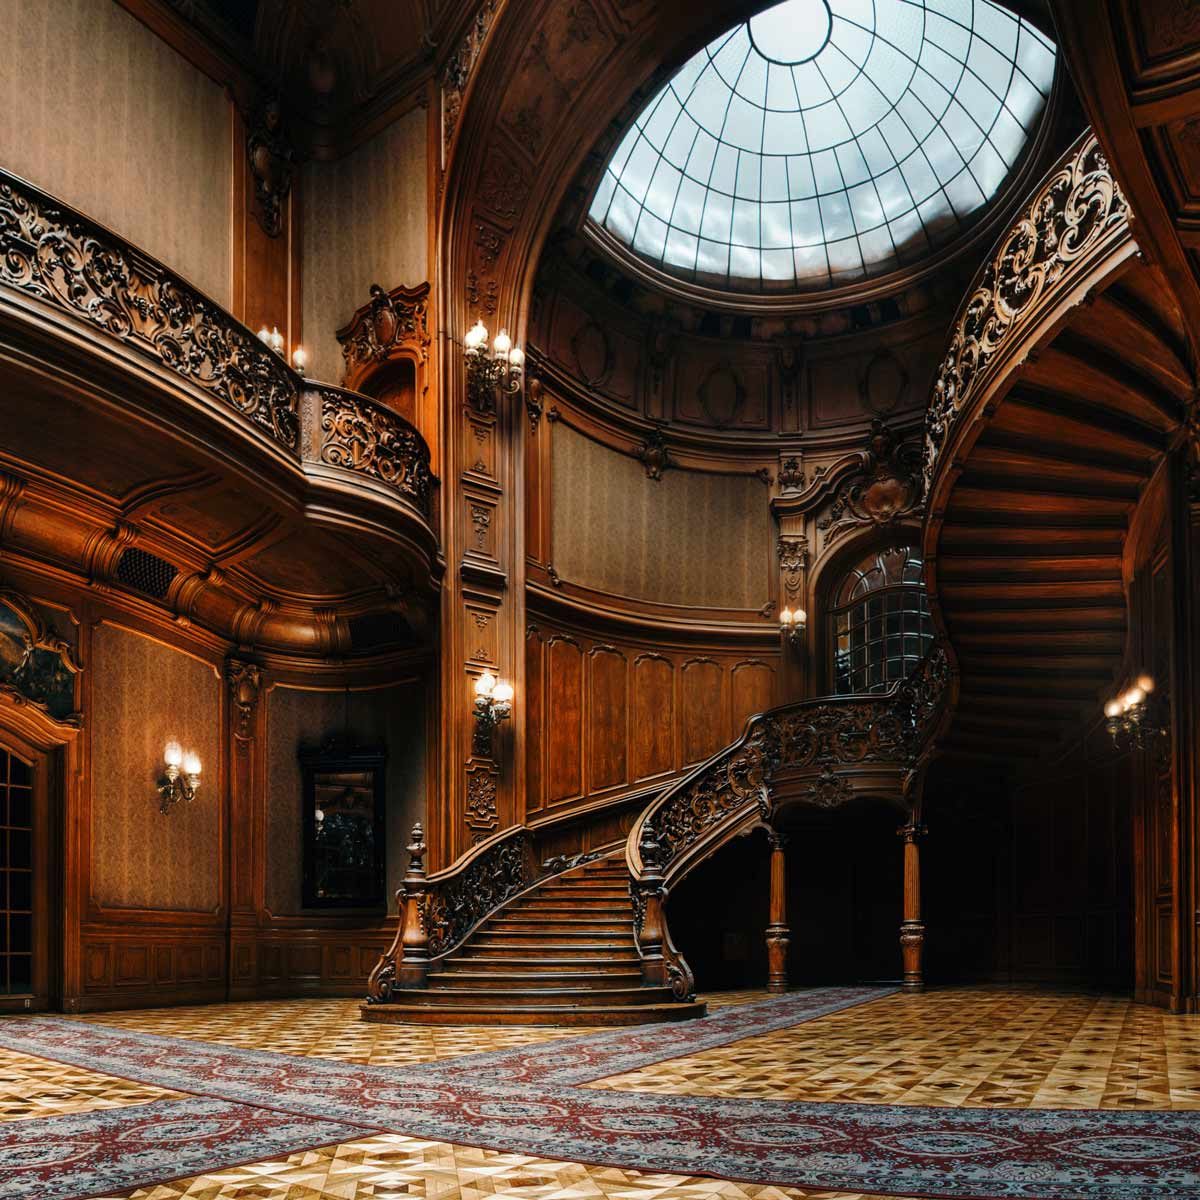 Interior of the magnificent House of Scientists mansion with ornate grand wooden staircase in the great hall.